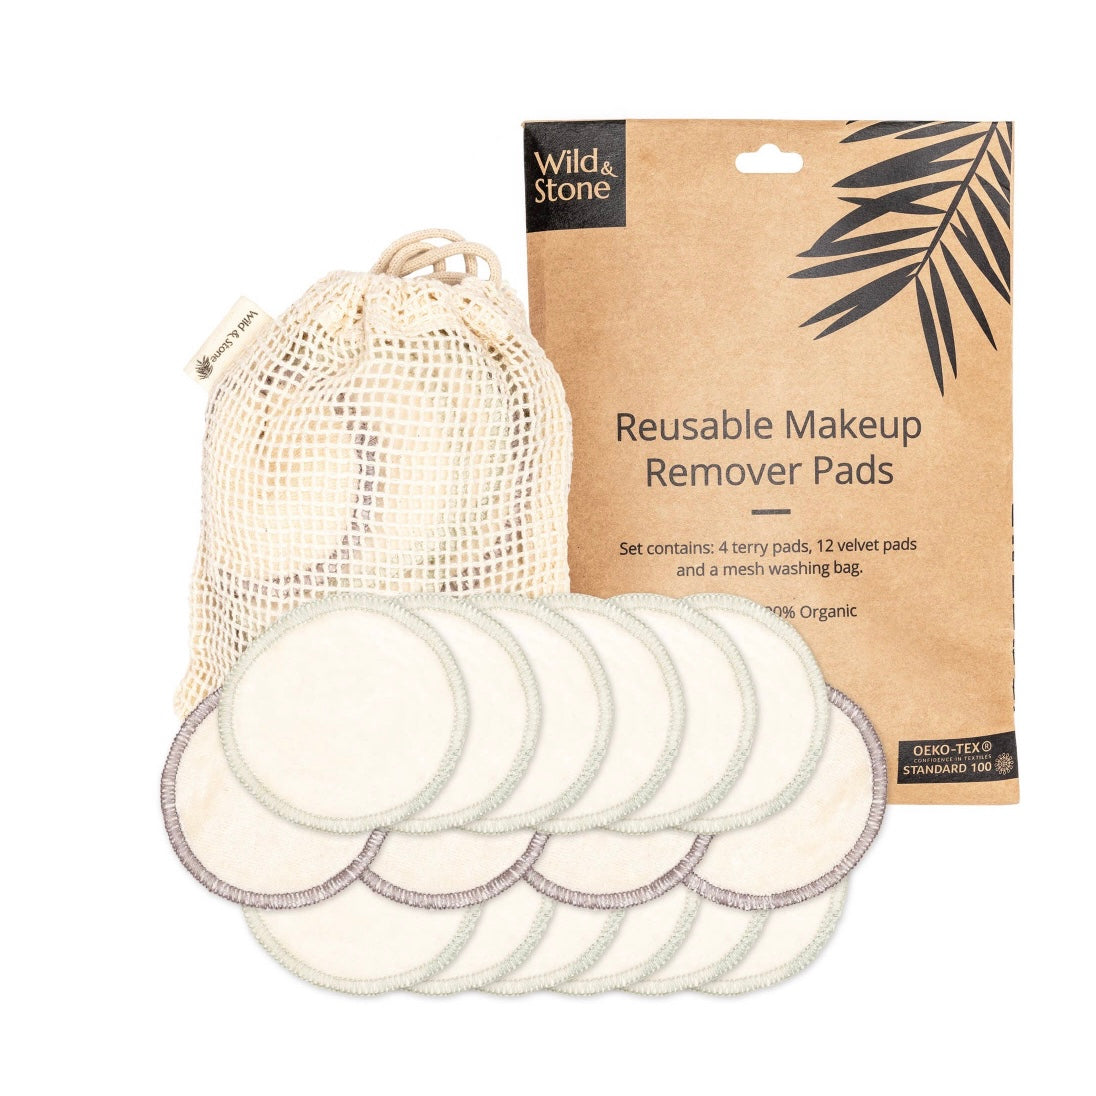 REUSABLE MAKEUP REMOVER PADS - PACK OF 16